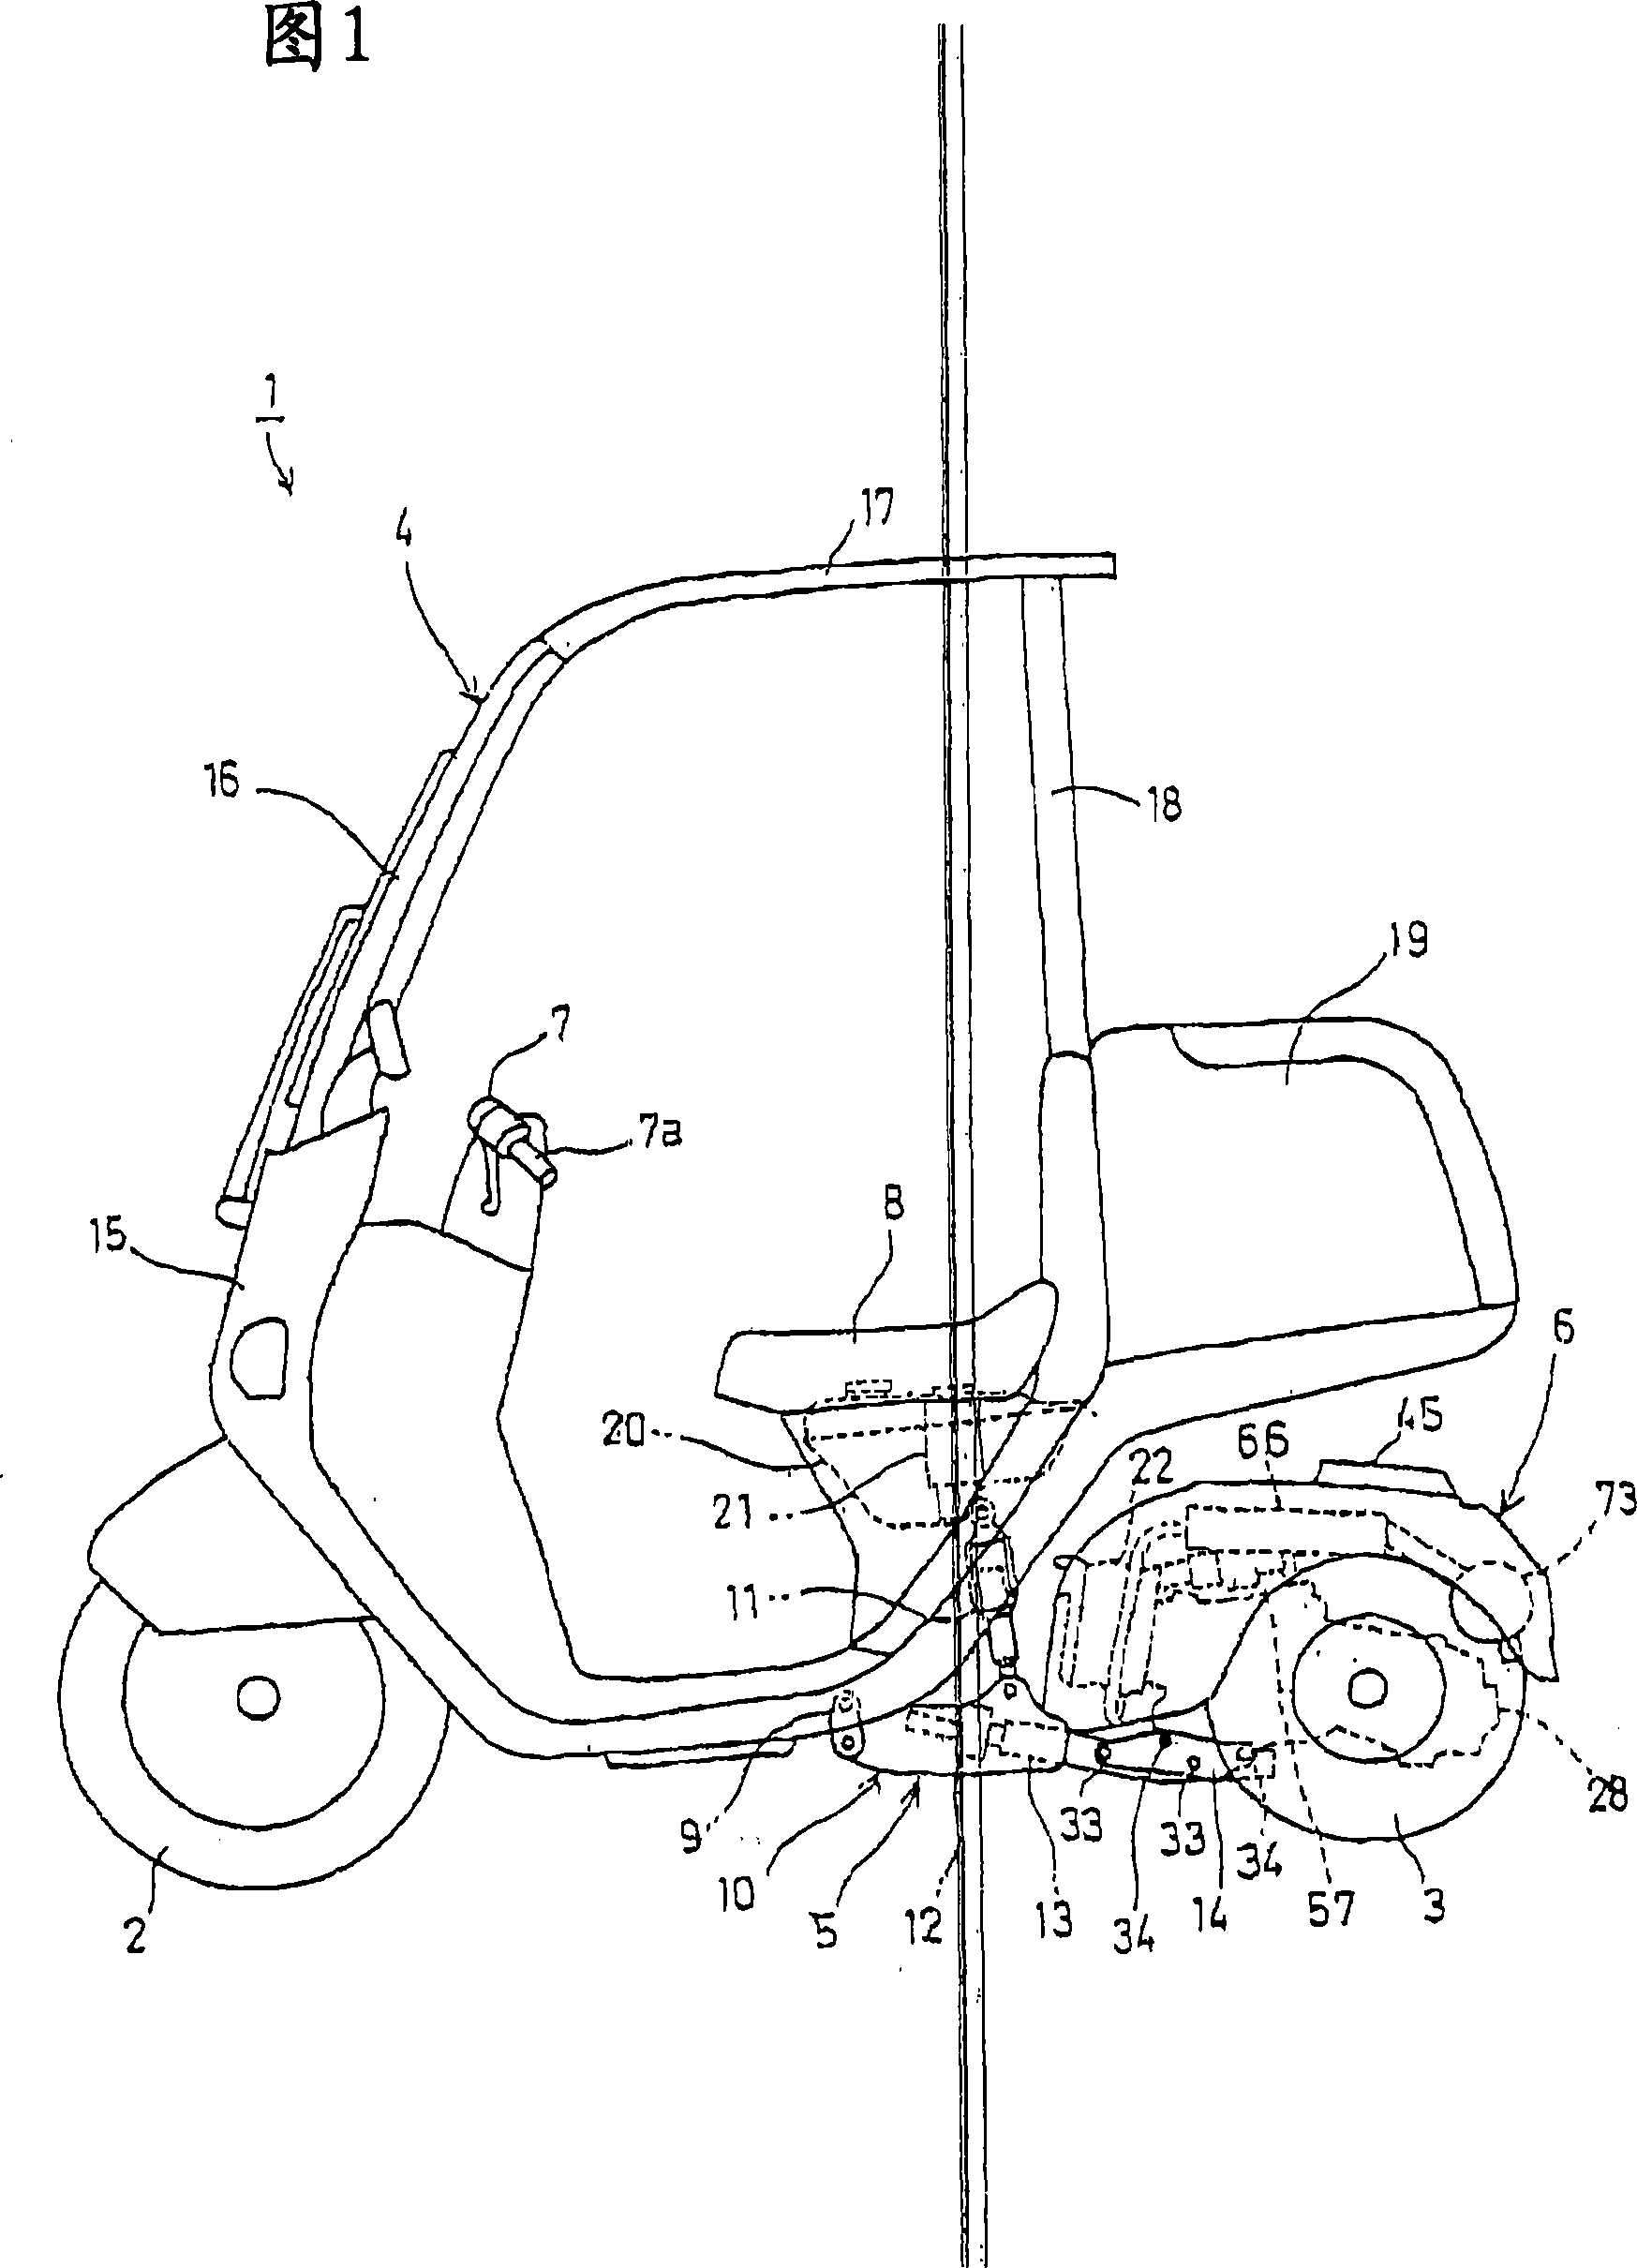 Blowby gas ventilator and crankcase emission control system of internal combustion engine